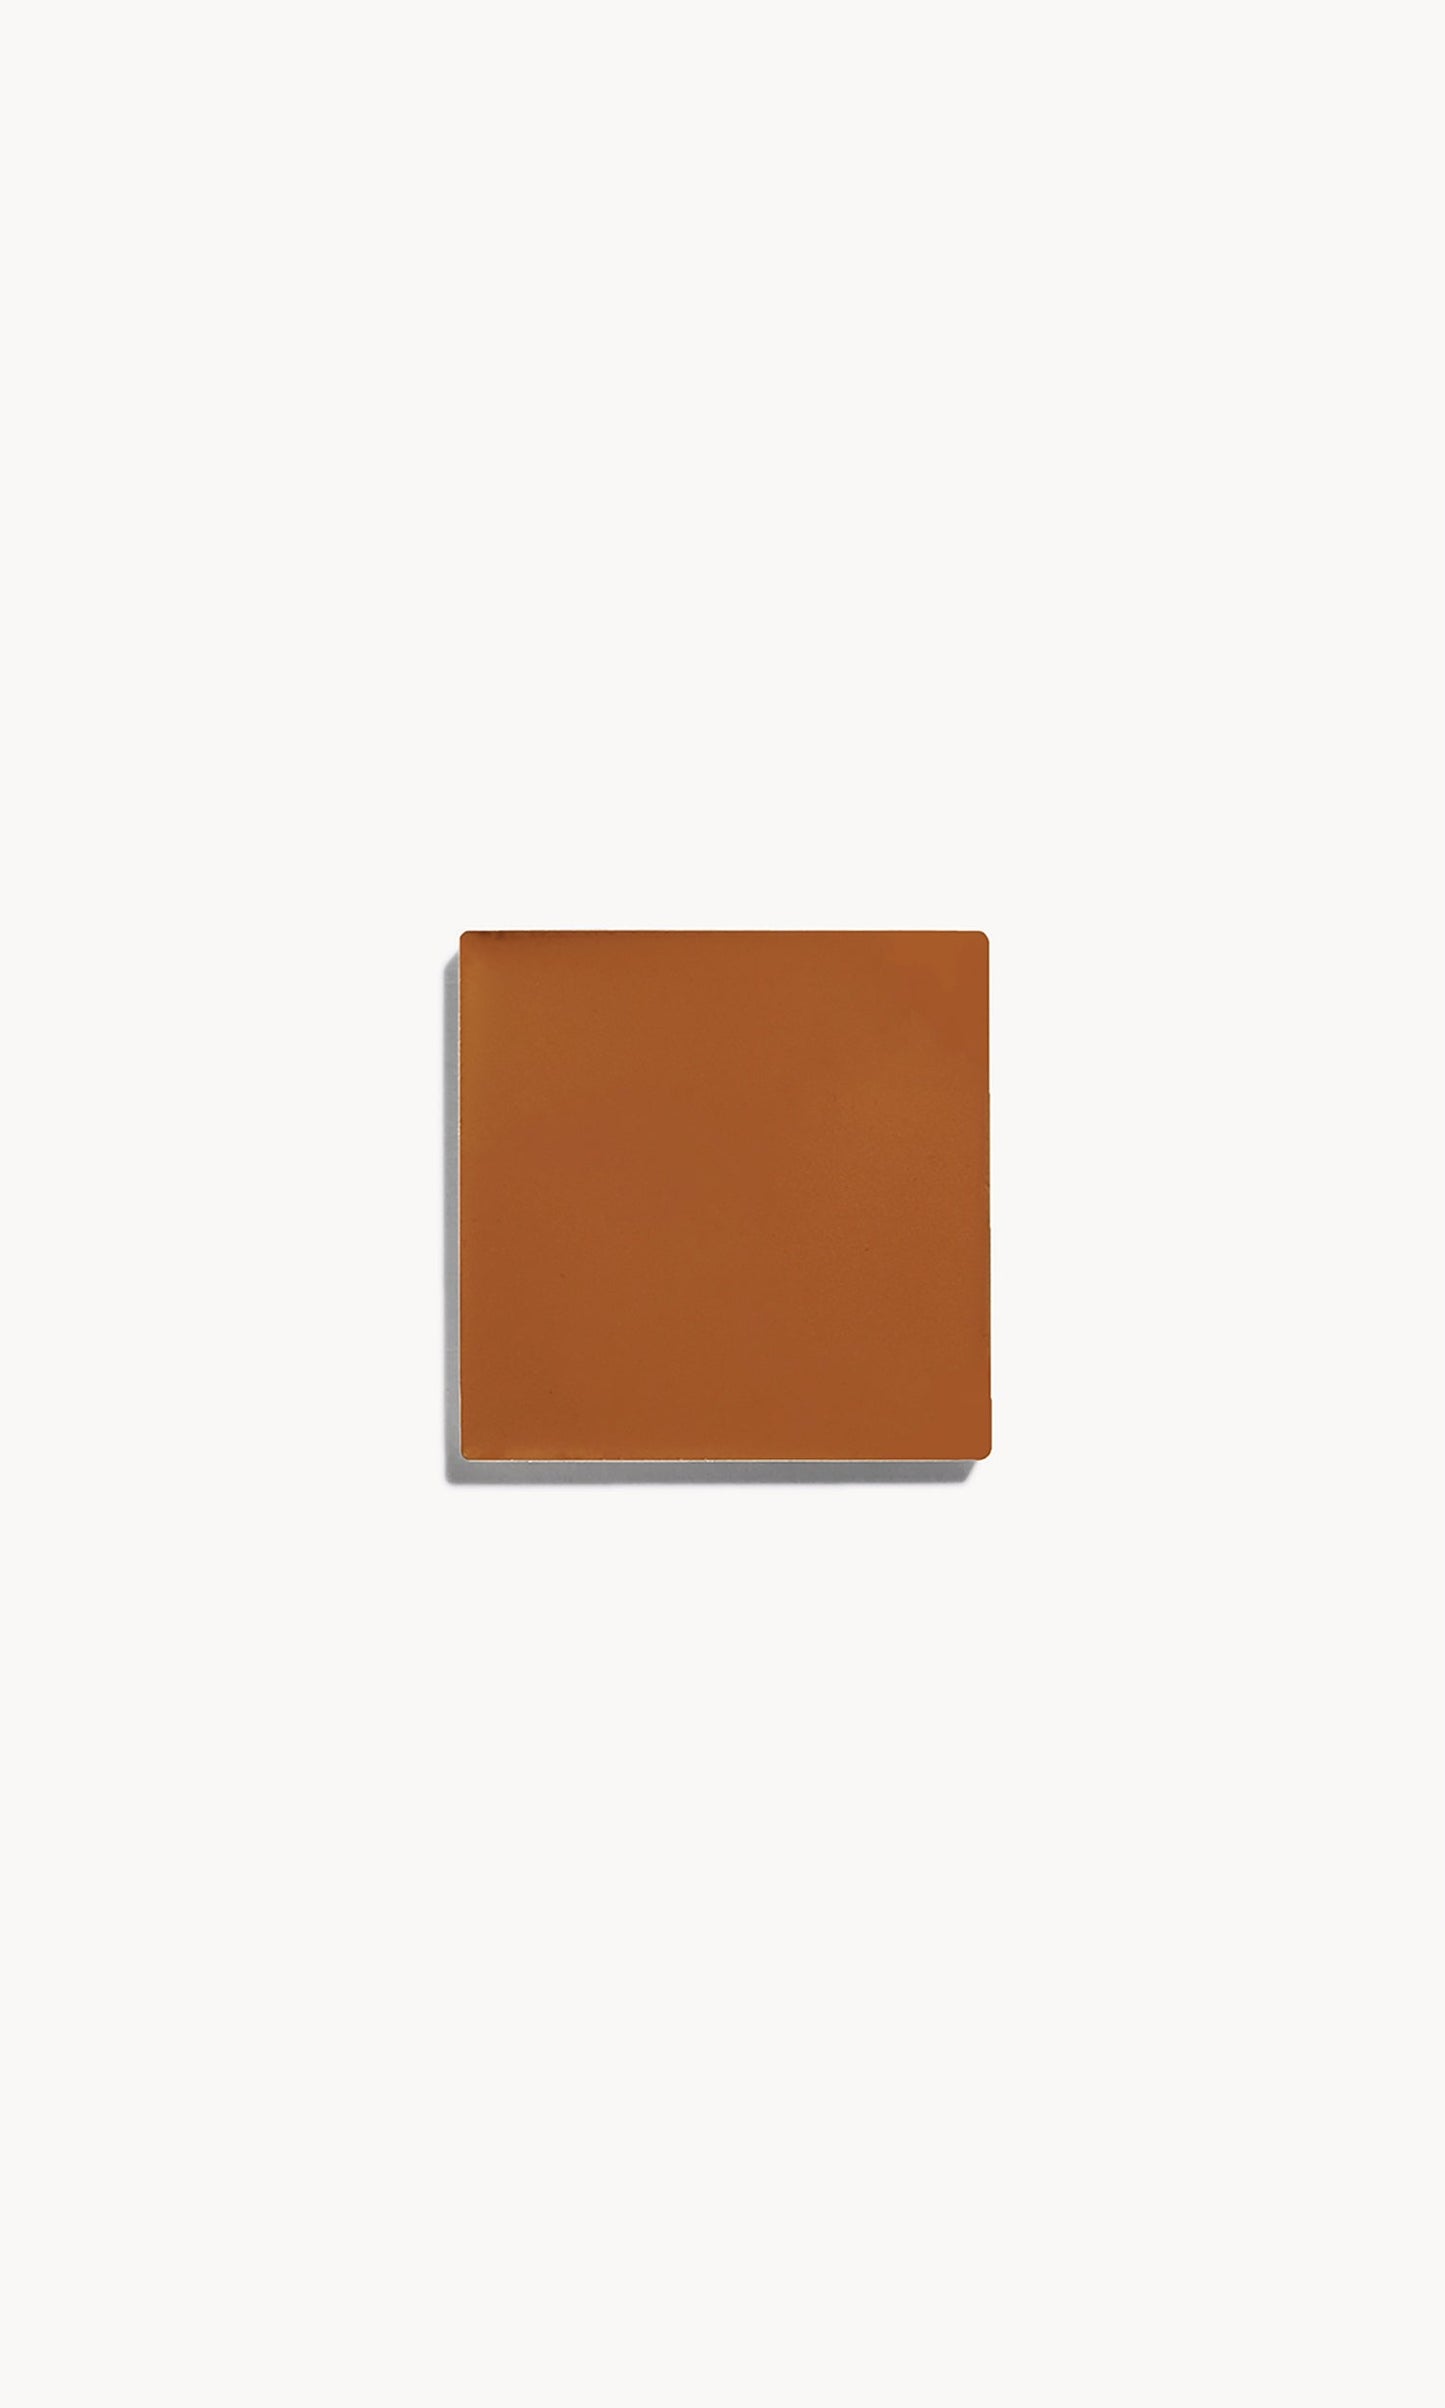 Square of deep warm cream foundation on a white background